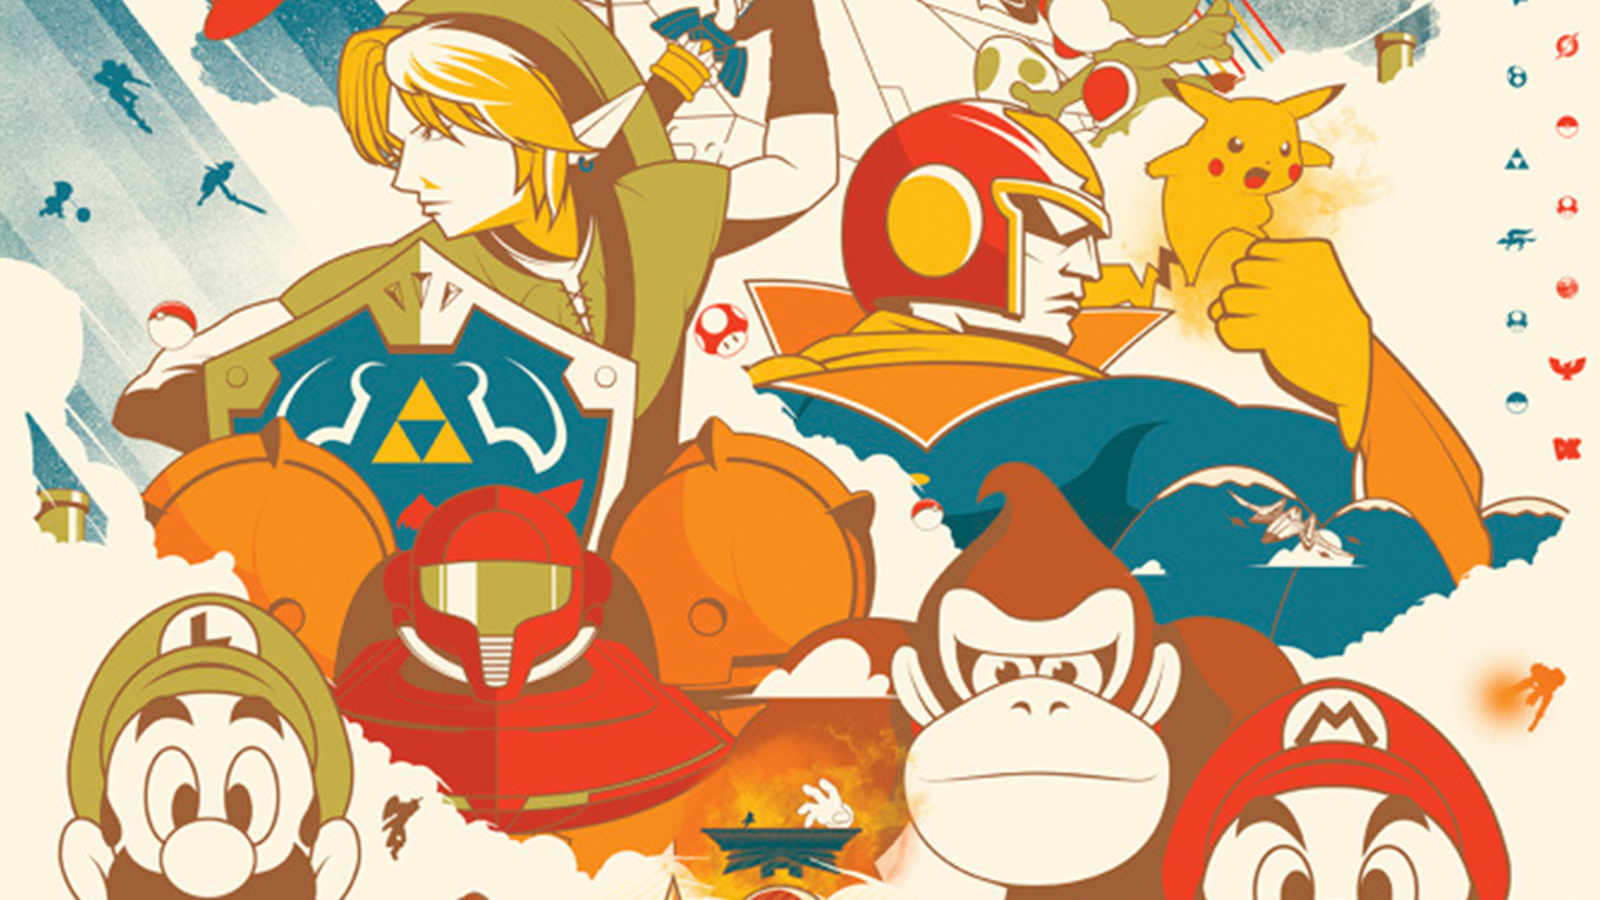 10272014 Prepare For Super Smash Bros With This Poster 6569